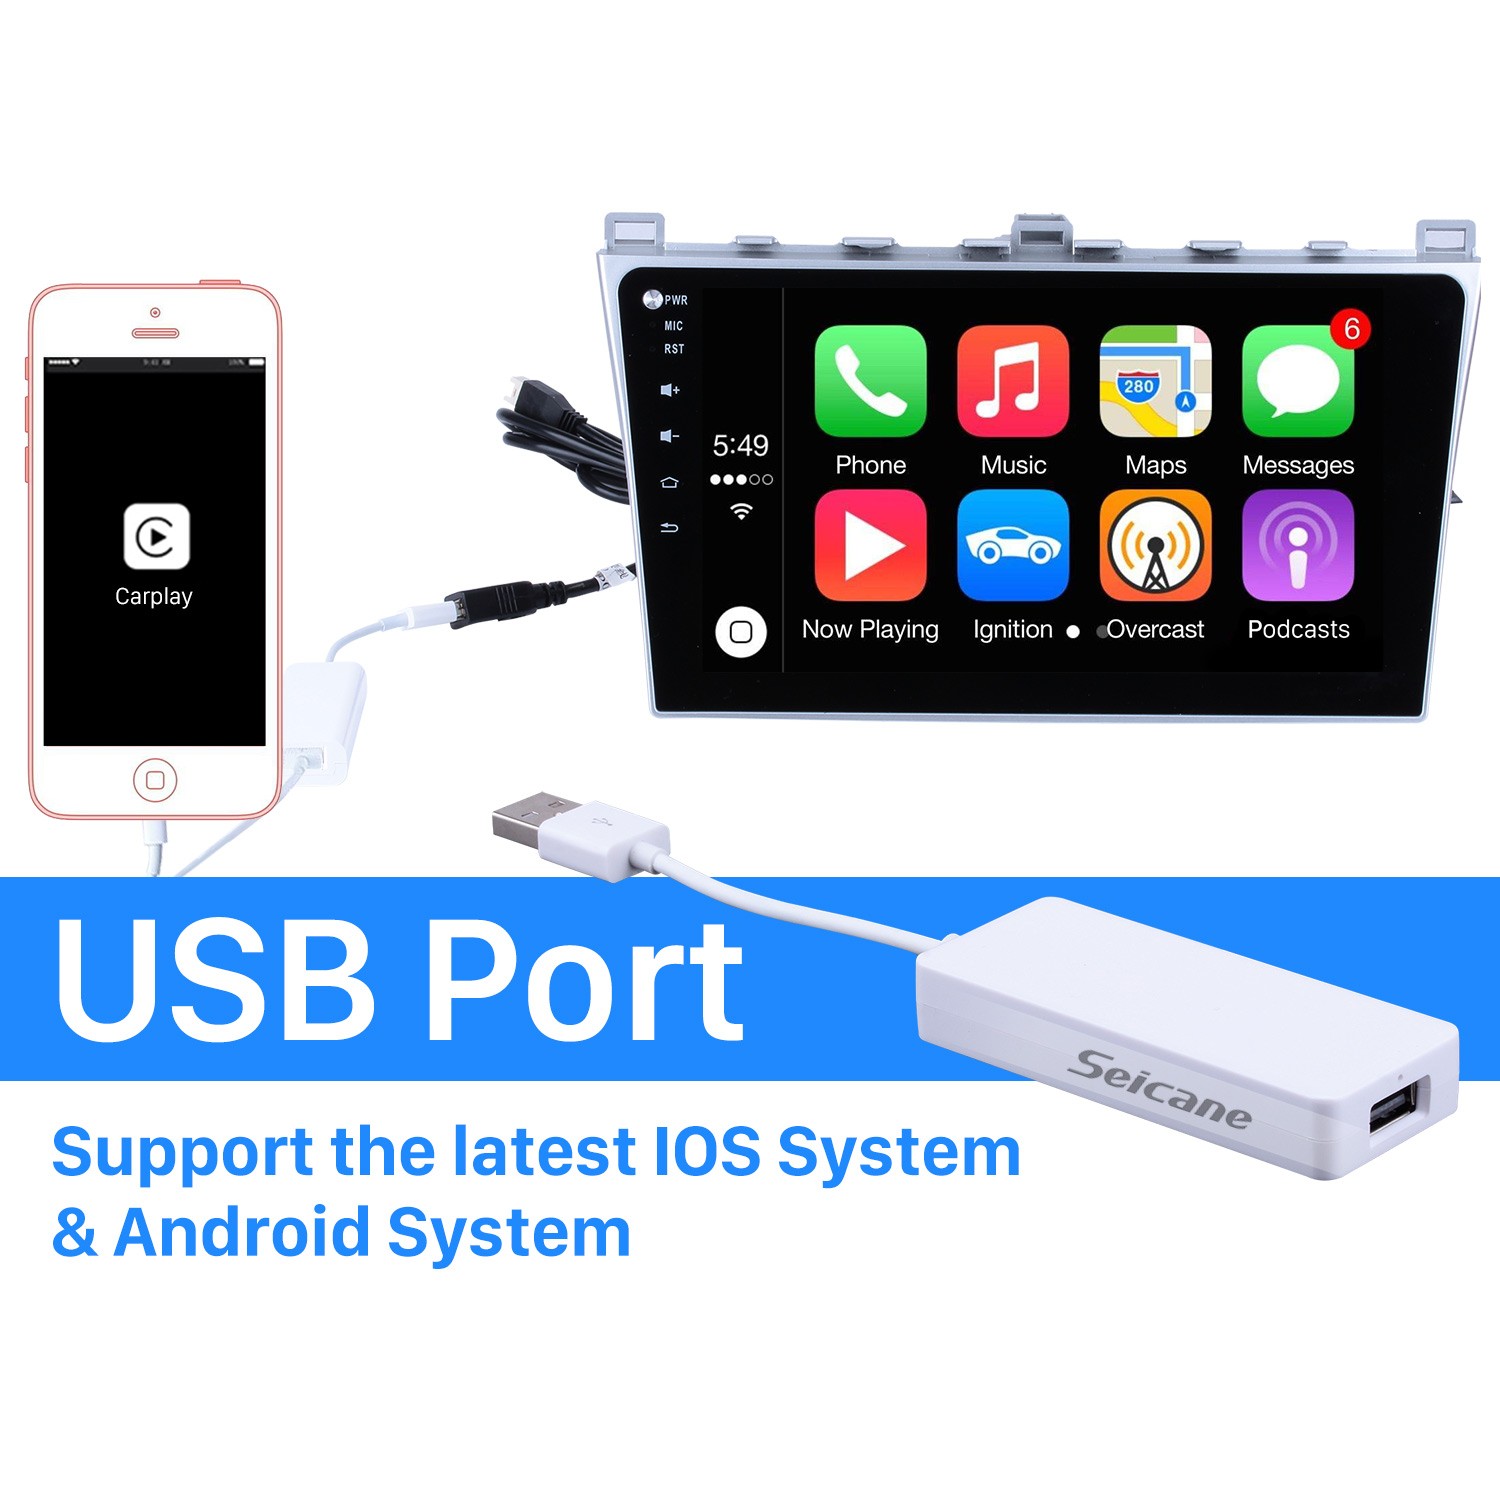 Plug and Play Carplay Android Auto USB Dongle For Android Car